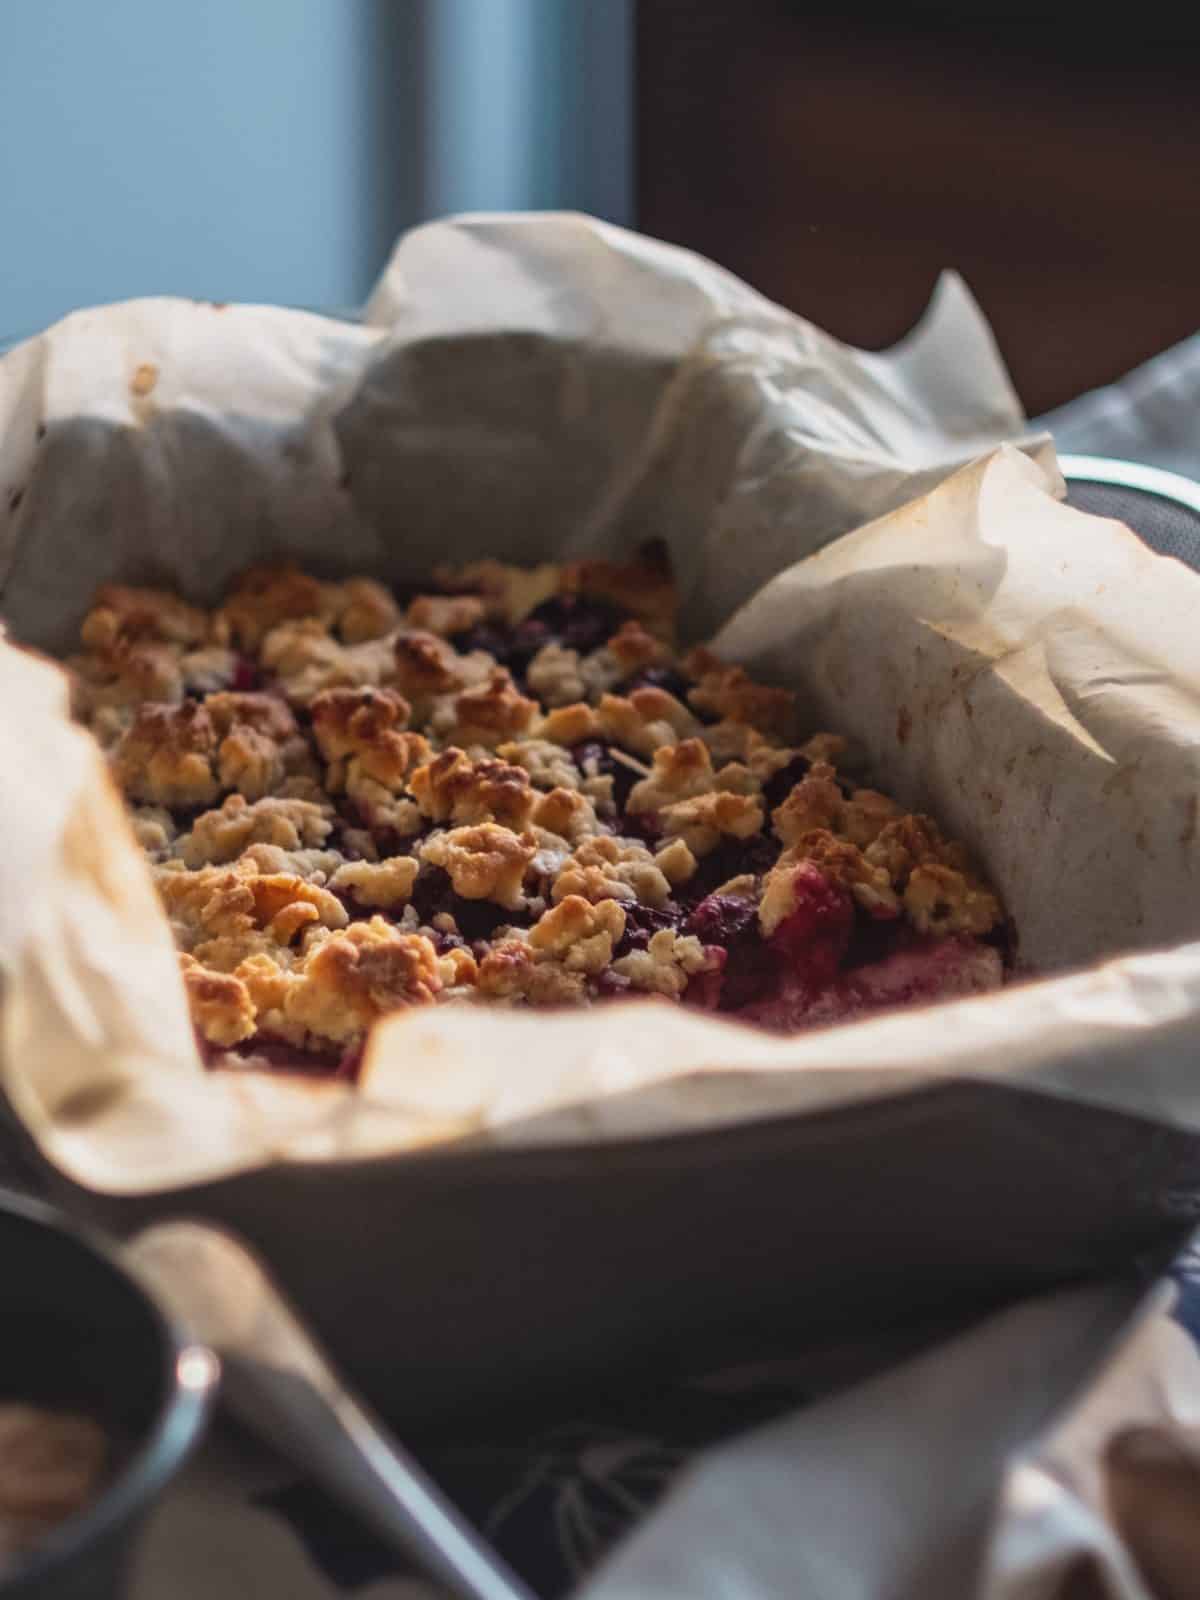 What's the Difference Between a Cobbler, Crisp, Crumble, Buckle, Betty, Pandowdy, etc.?